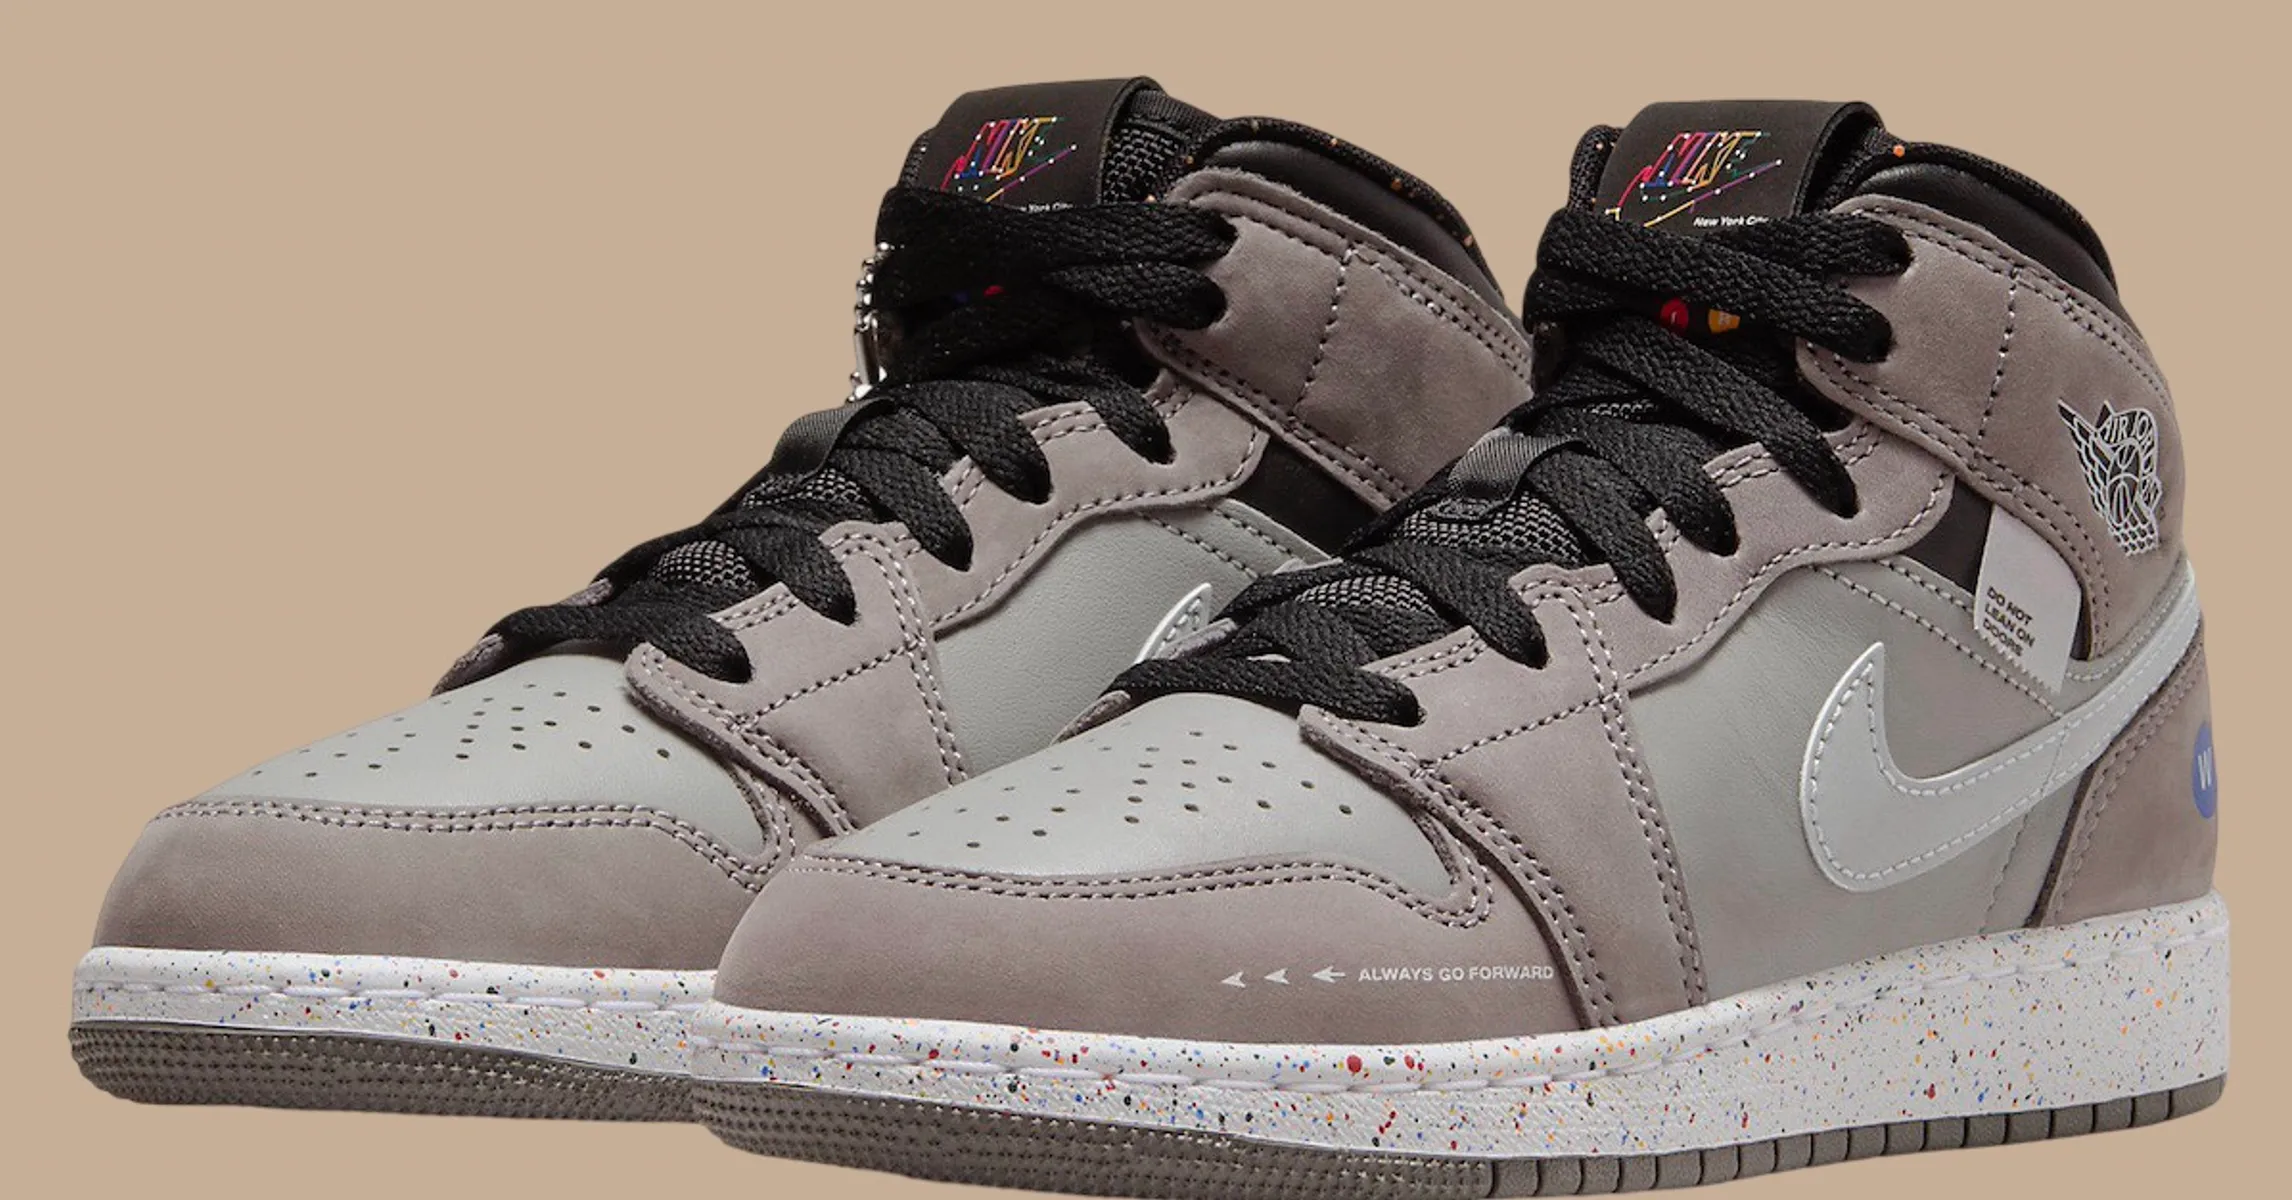 Air Jordan 1 Mid Wings “NYC Subway” Official Photos Revealed